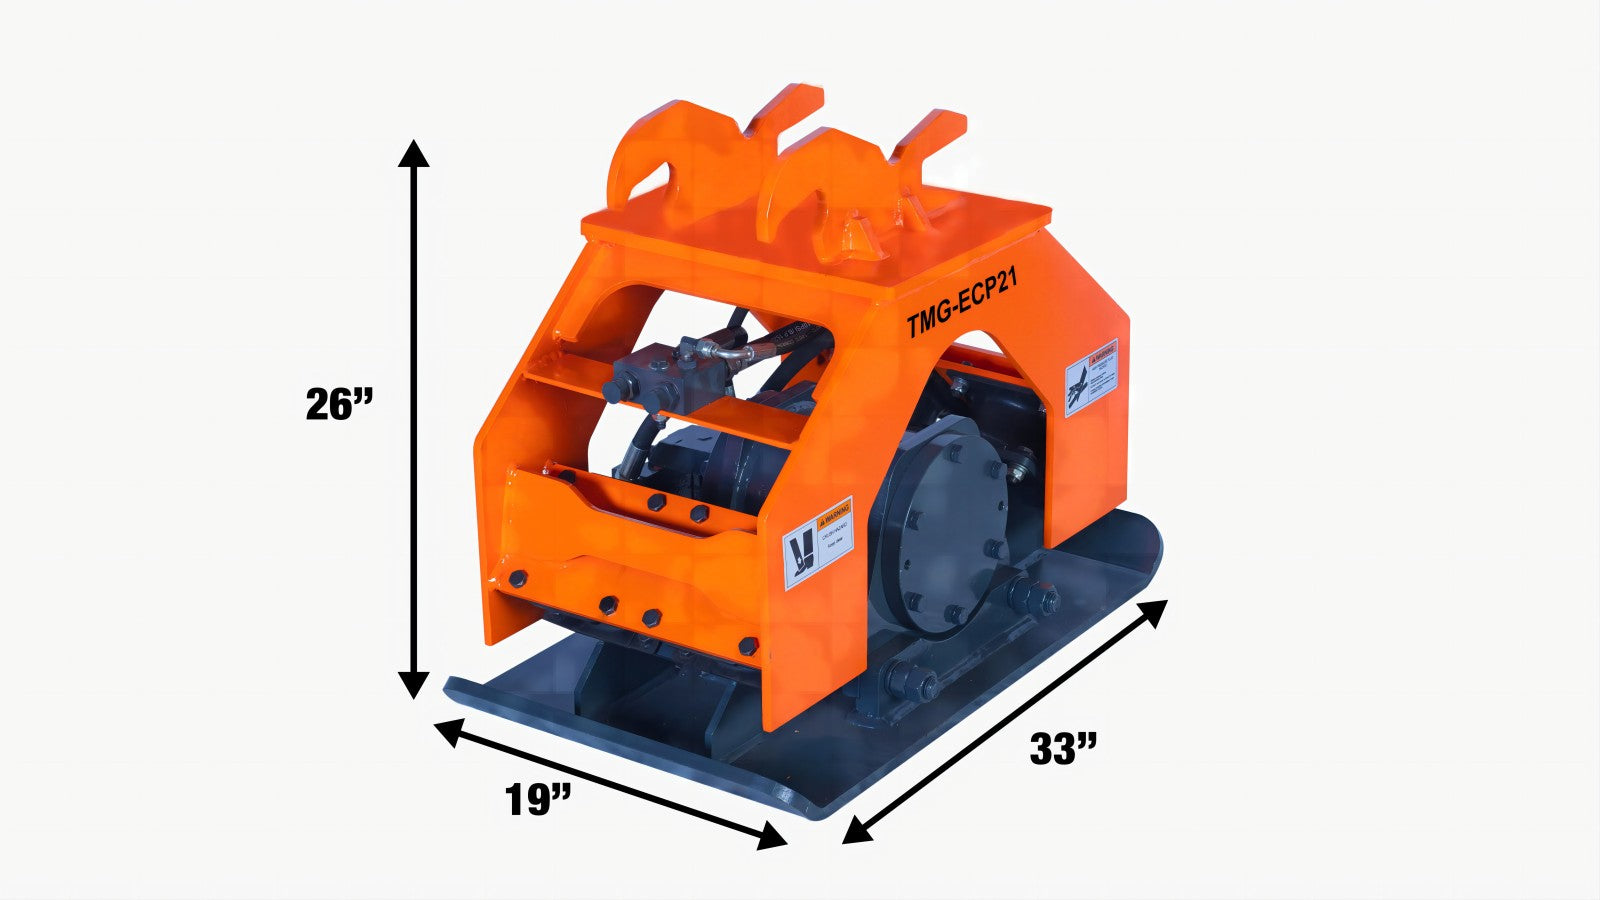 TMG Industrial 8,800-lb Hydraulic Plate Compactor, 2-4 Ton Excavator Weight, 19” Compact Capacity, TMG-ECP21-specifications-image